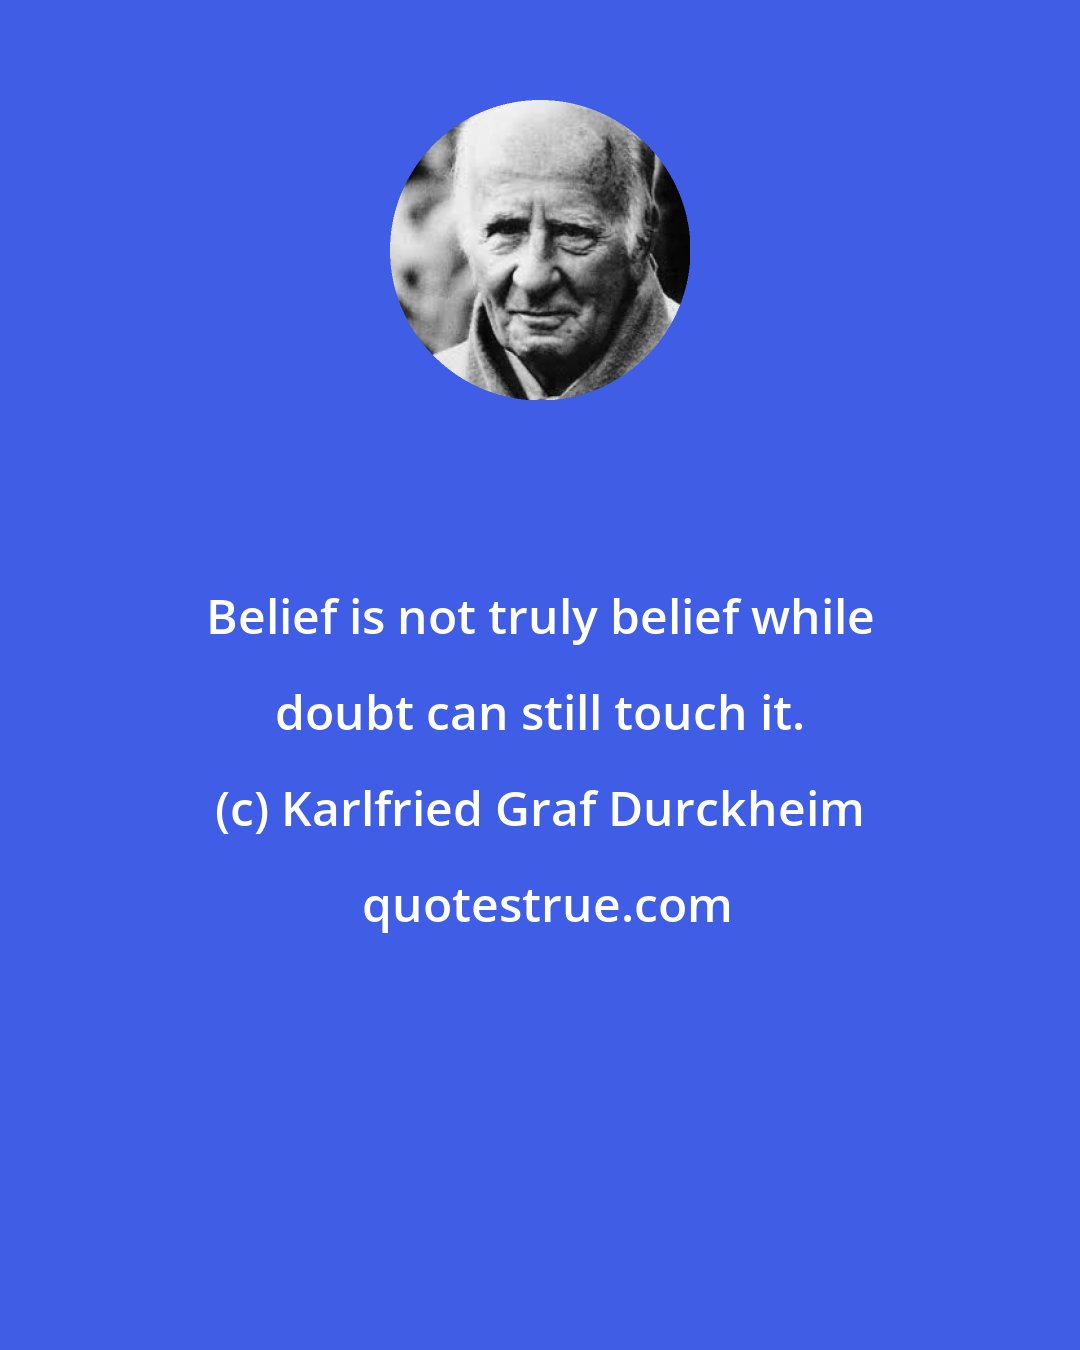 Karlfried Graf Durckheim: Belief is not truly belief while doubt can still touch it.